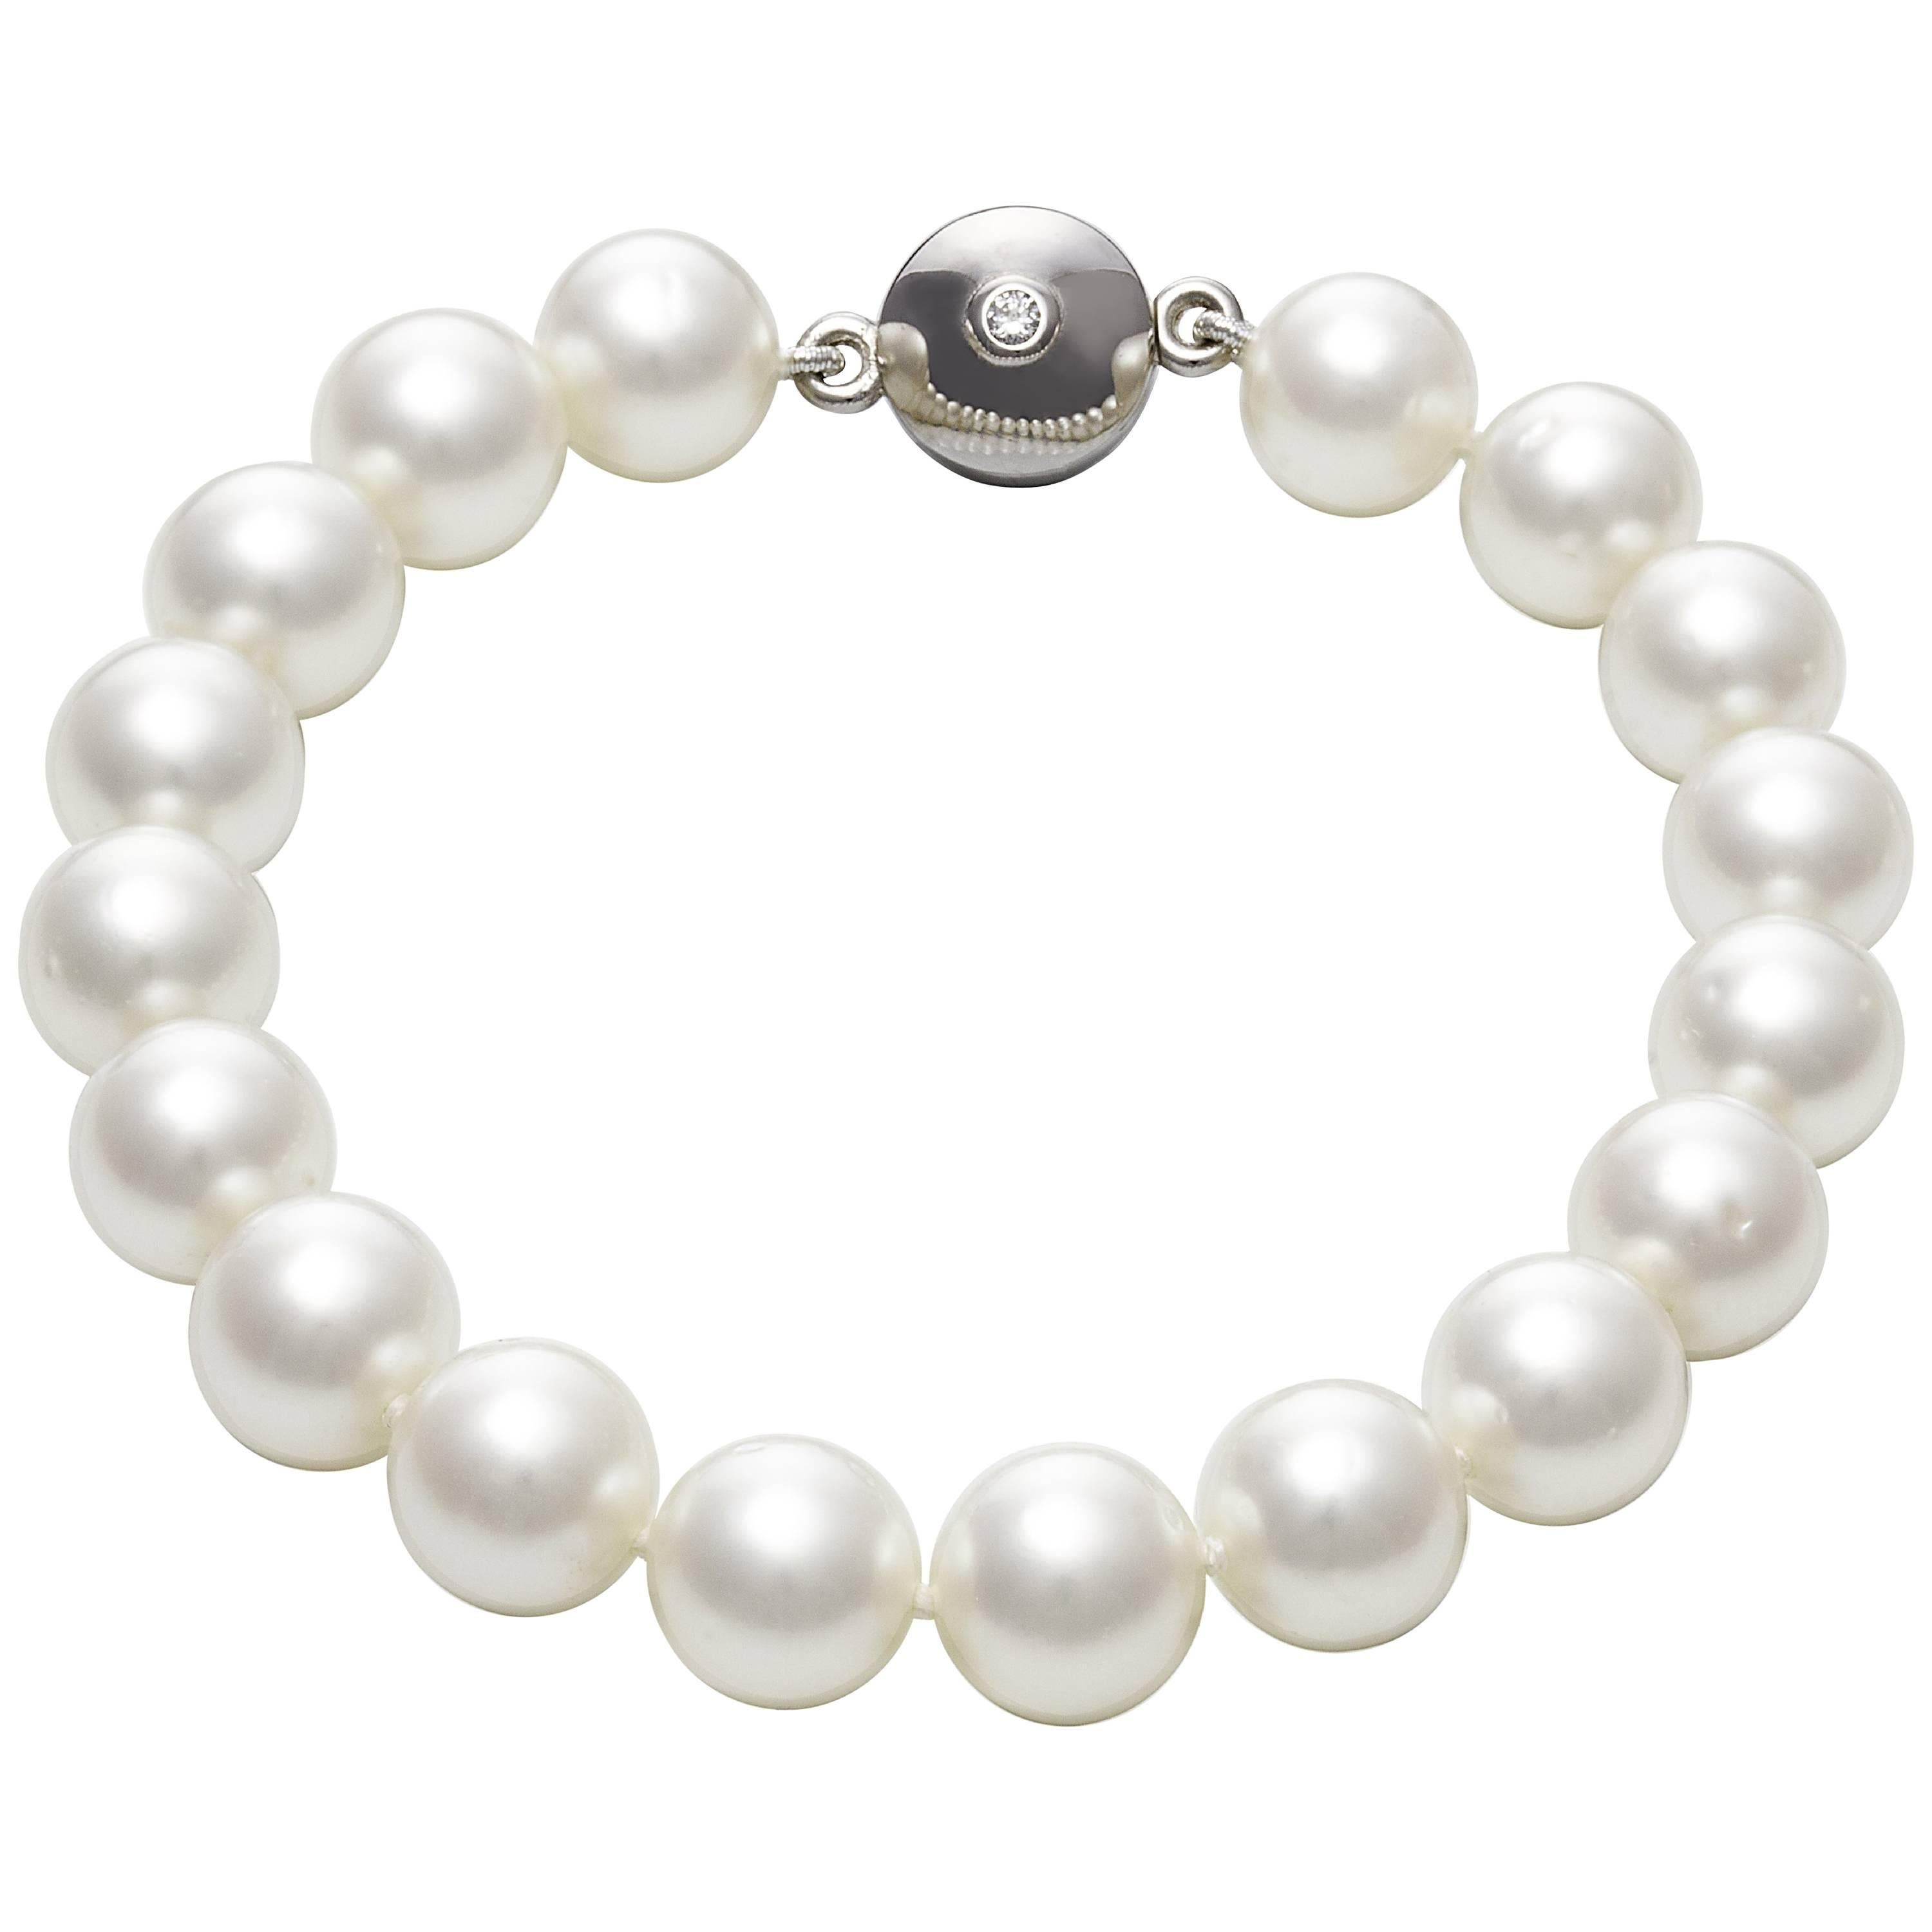 Australian South Sea Round Pearl Bracelet with Magnetic Clasp